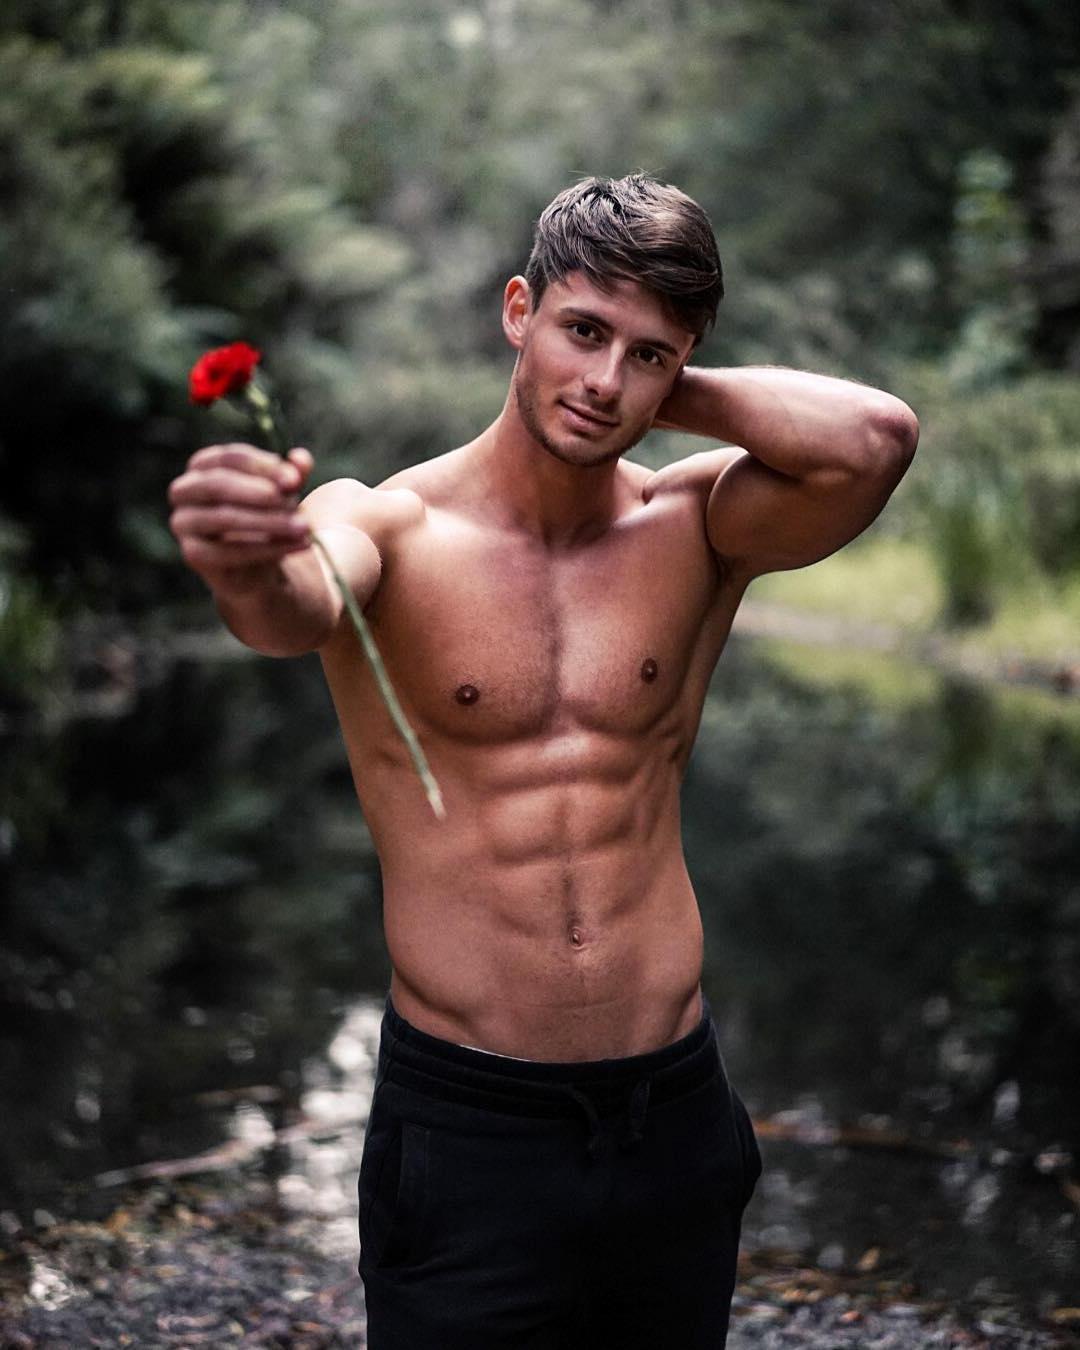 cute-college-boy-shirtless-fit-body-red-rose